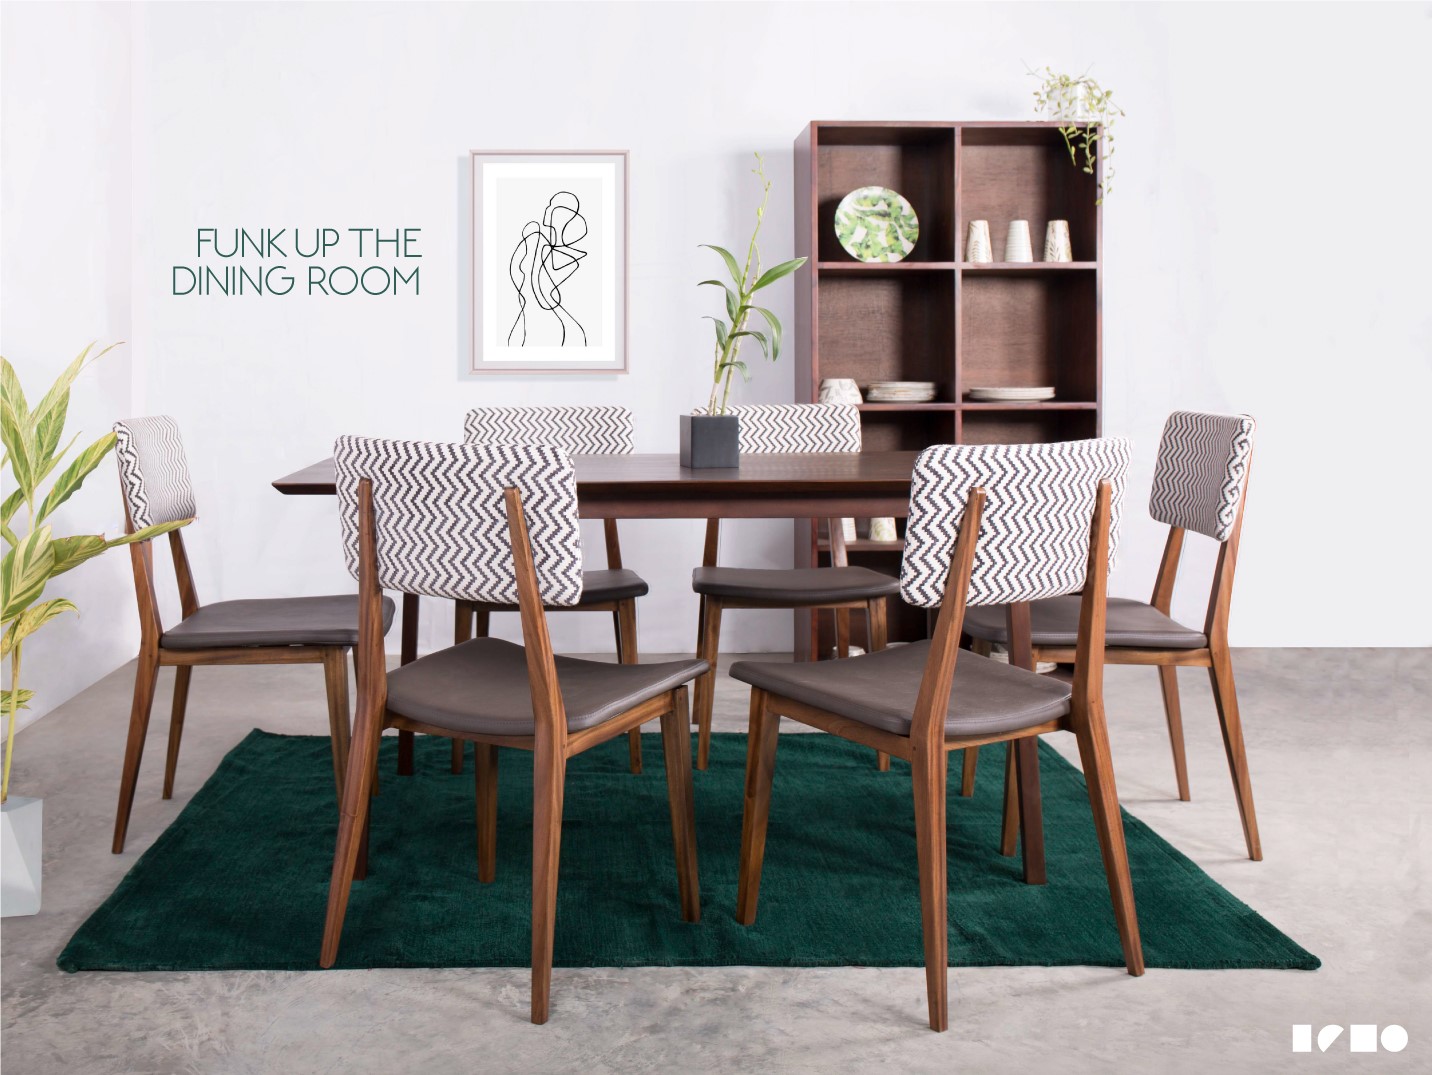 Vesterbro Faux Leather Dining Chair